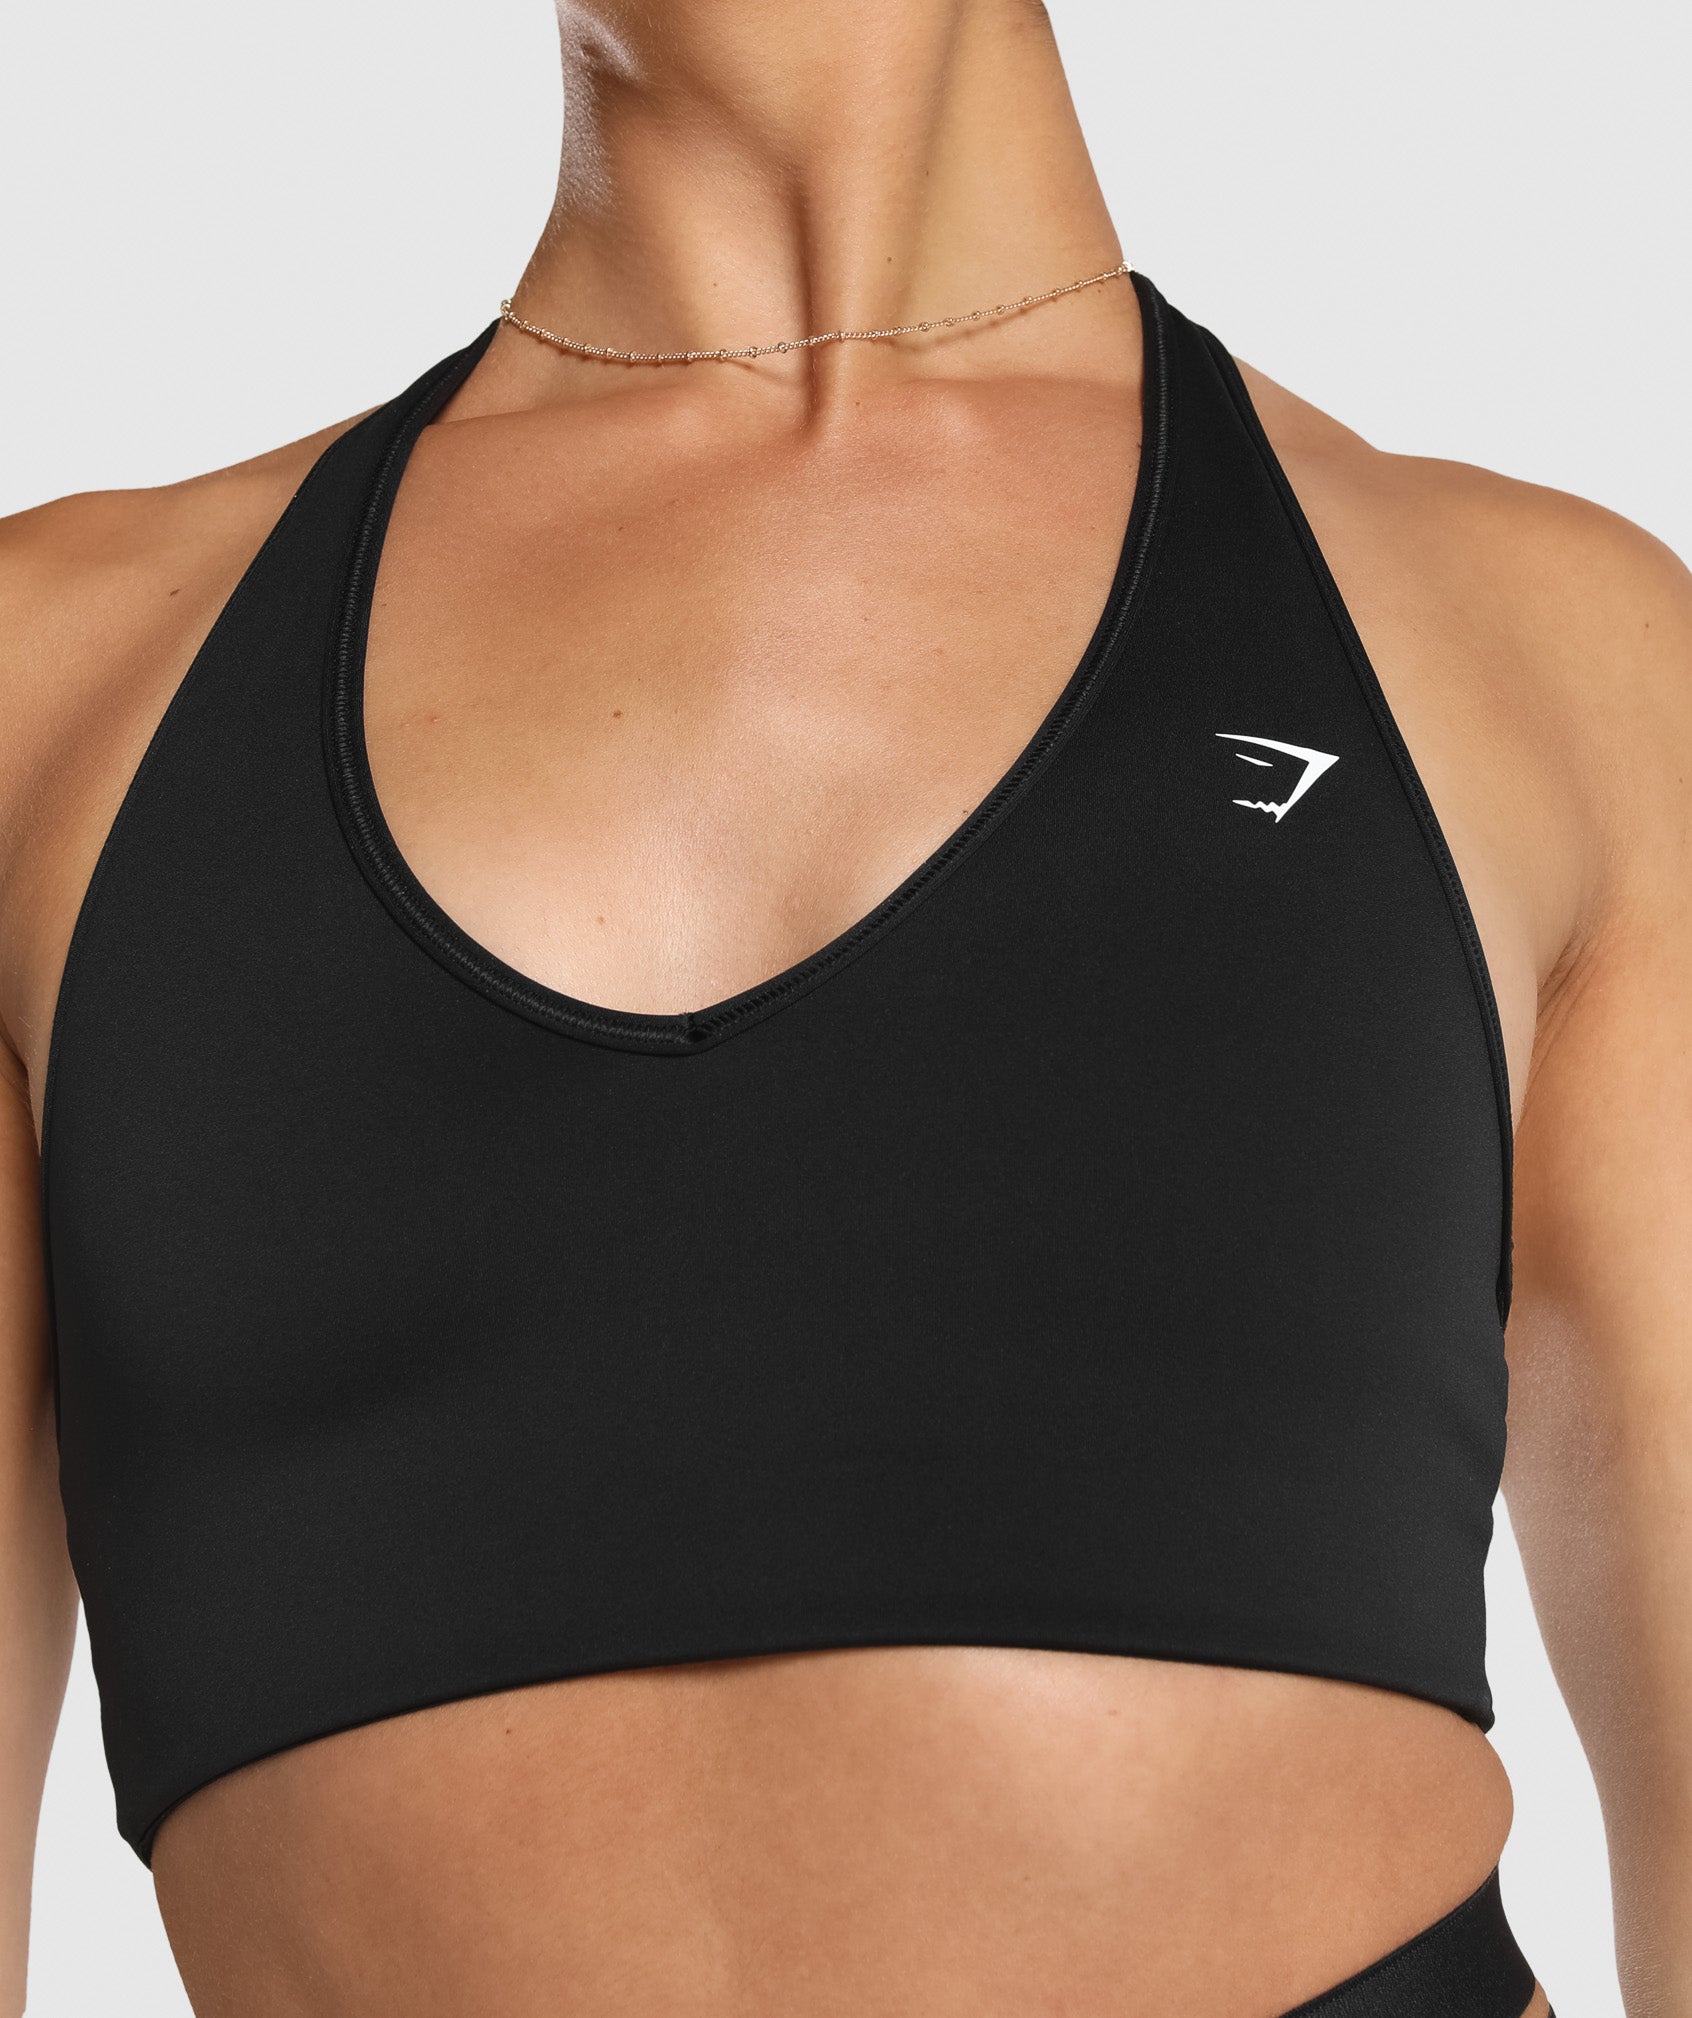 Gymshark Black and Gray Sports Bra Size Small  Gray sports bra, Sports bra  sizing, Black and grey